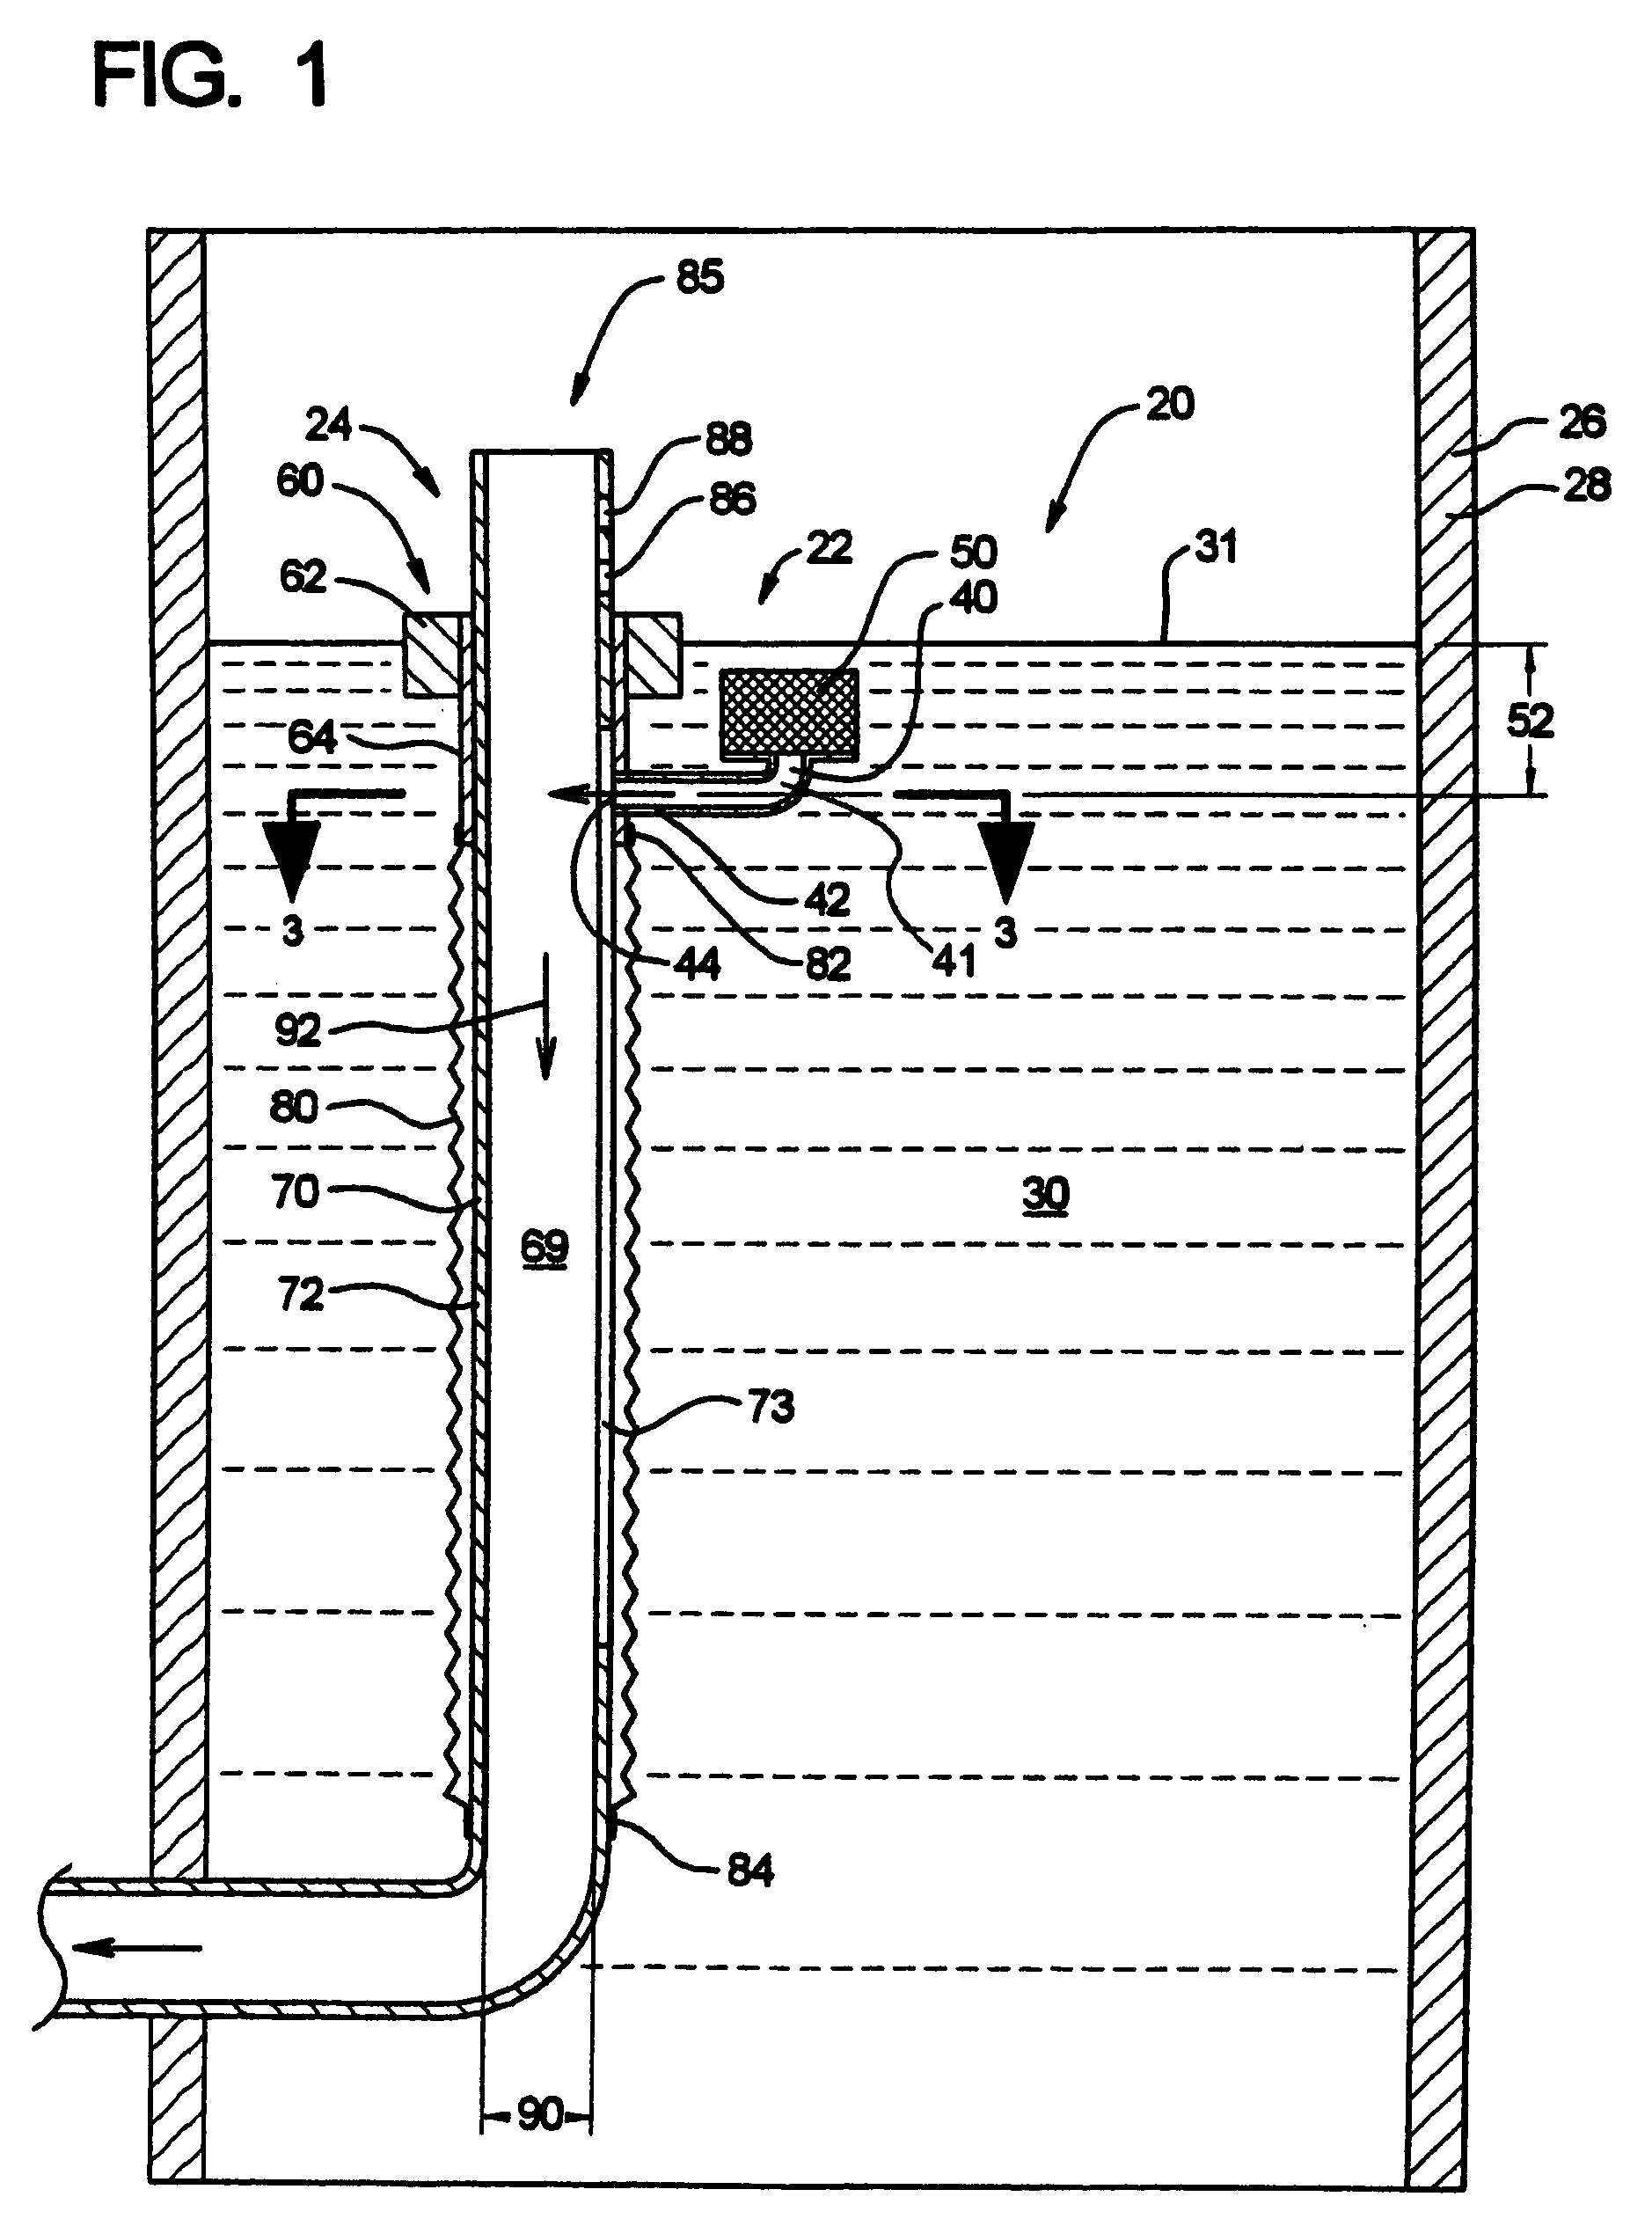 Flow control system for a holding pond